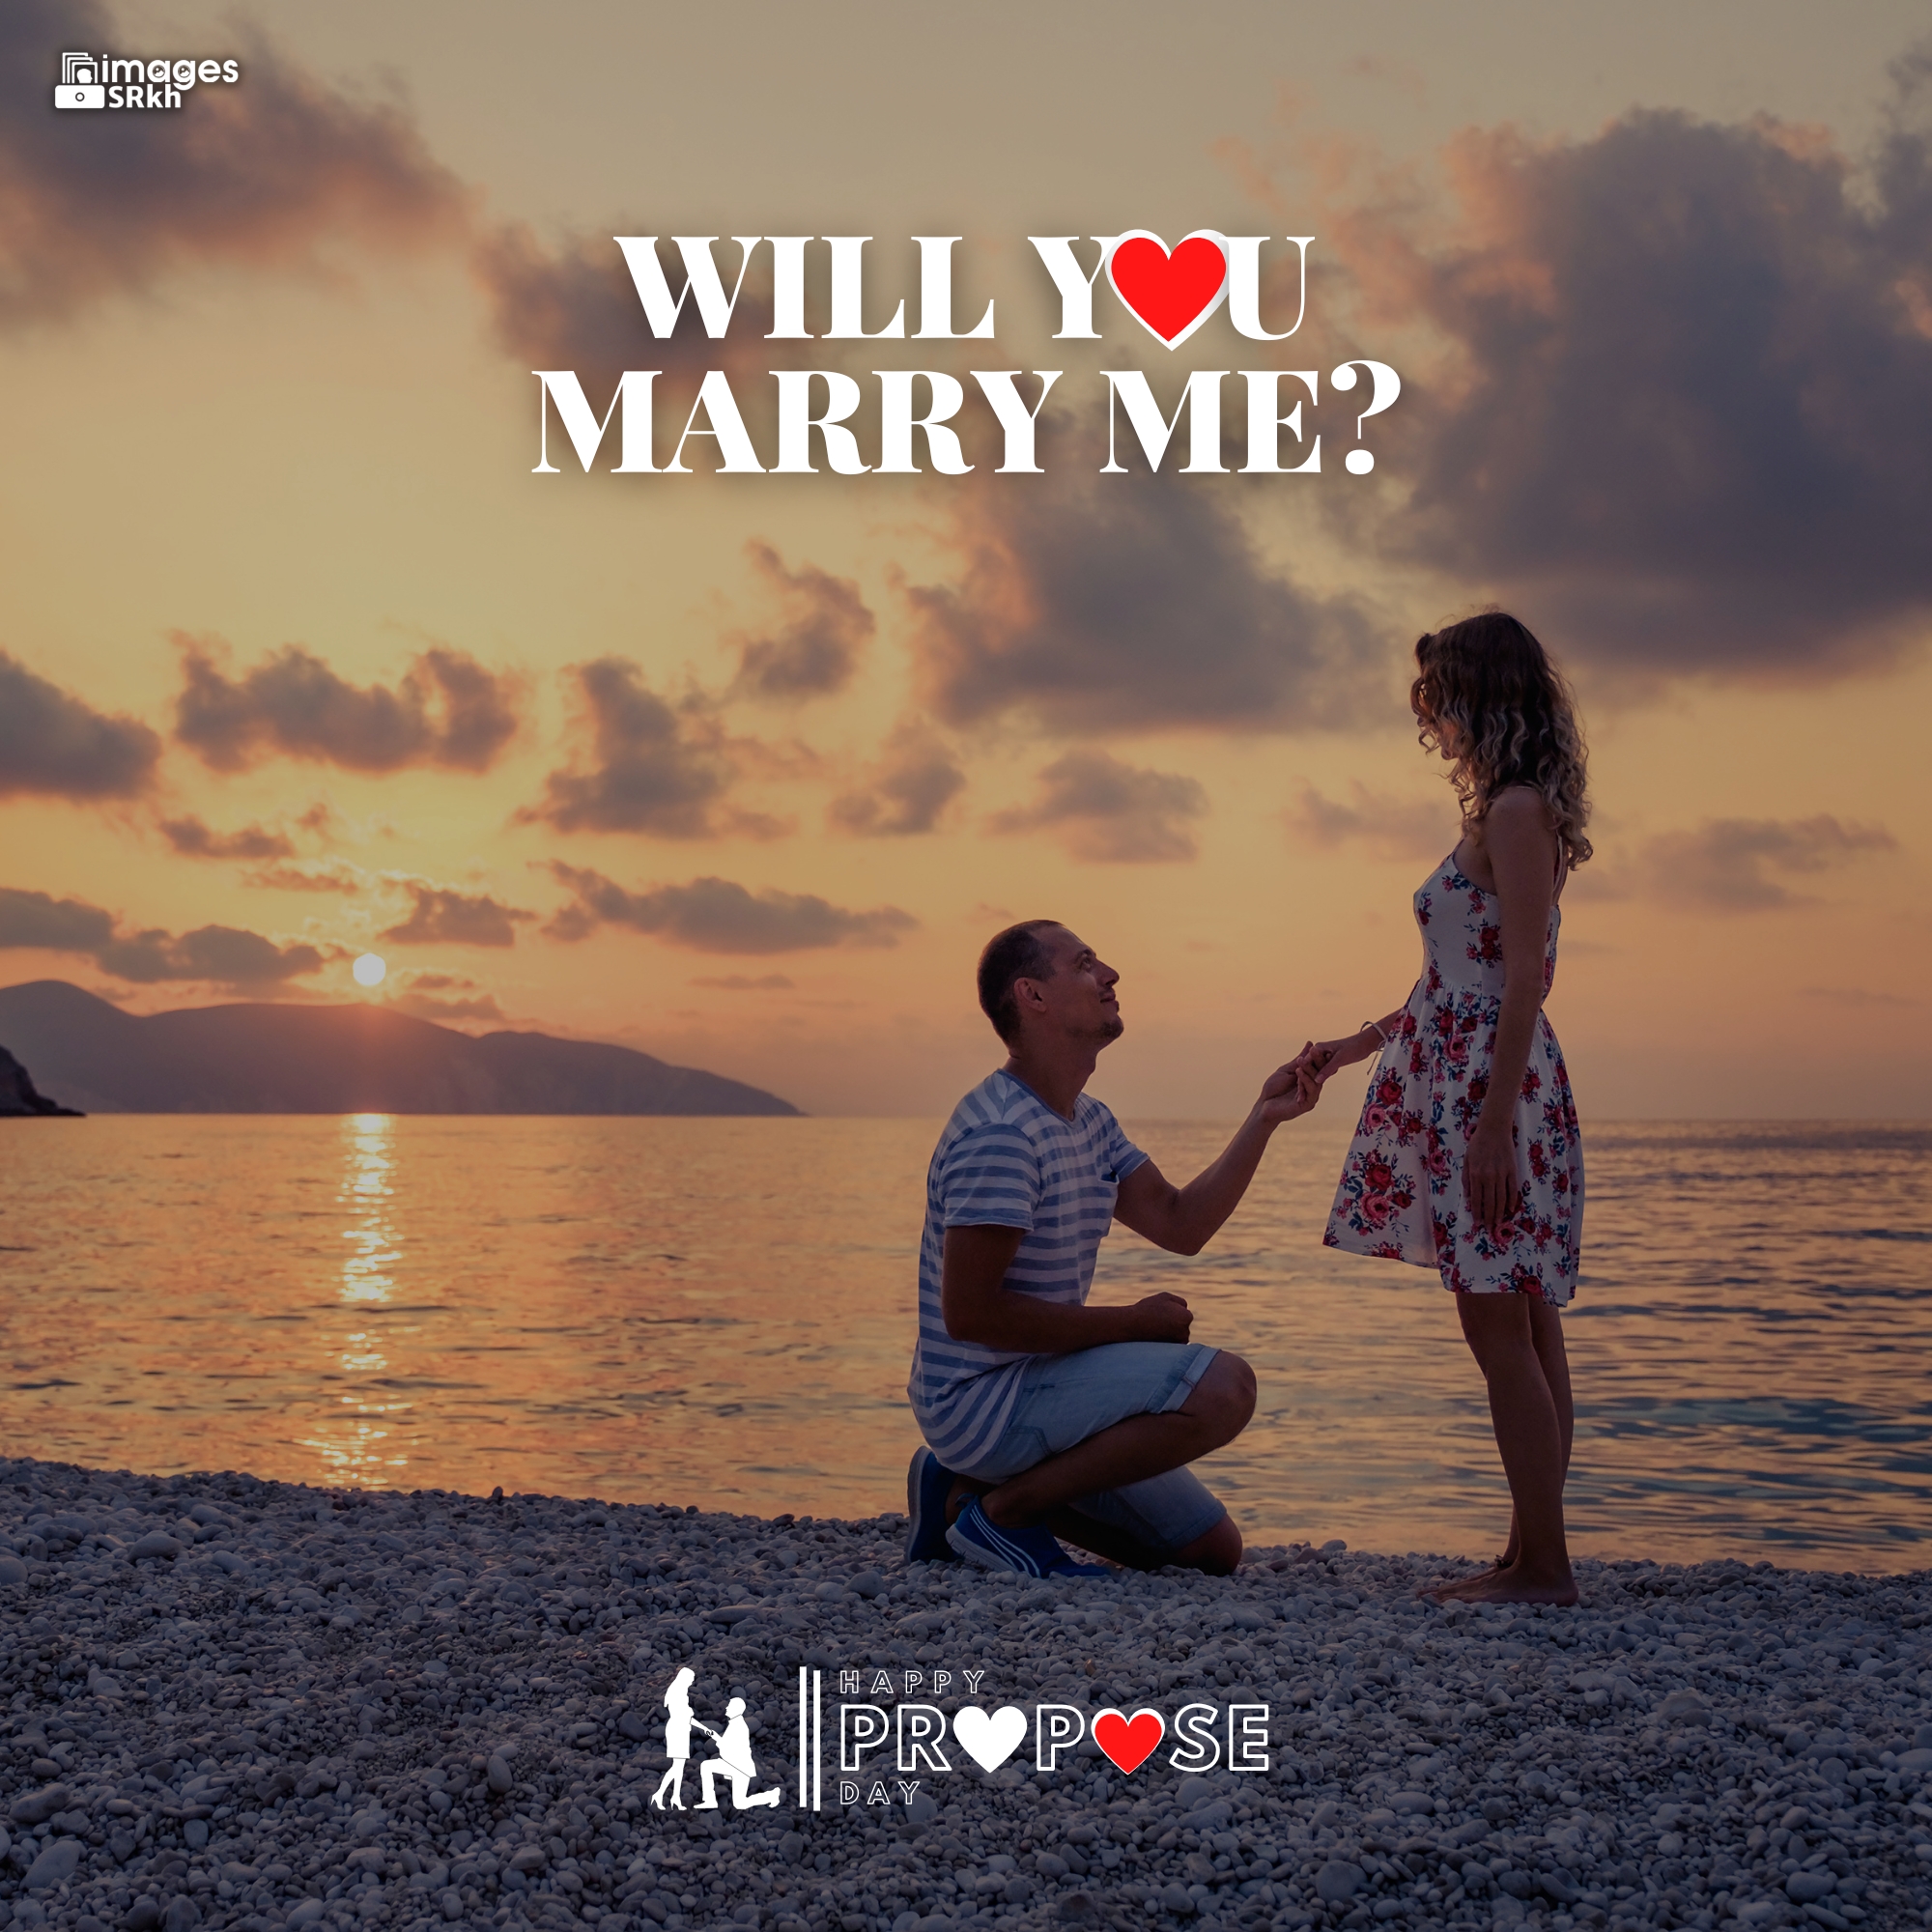 Propose Day Images | 274 | Will You MARRY ME